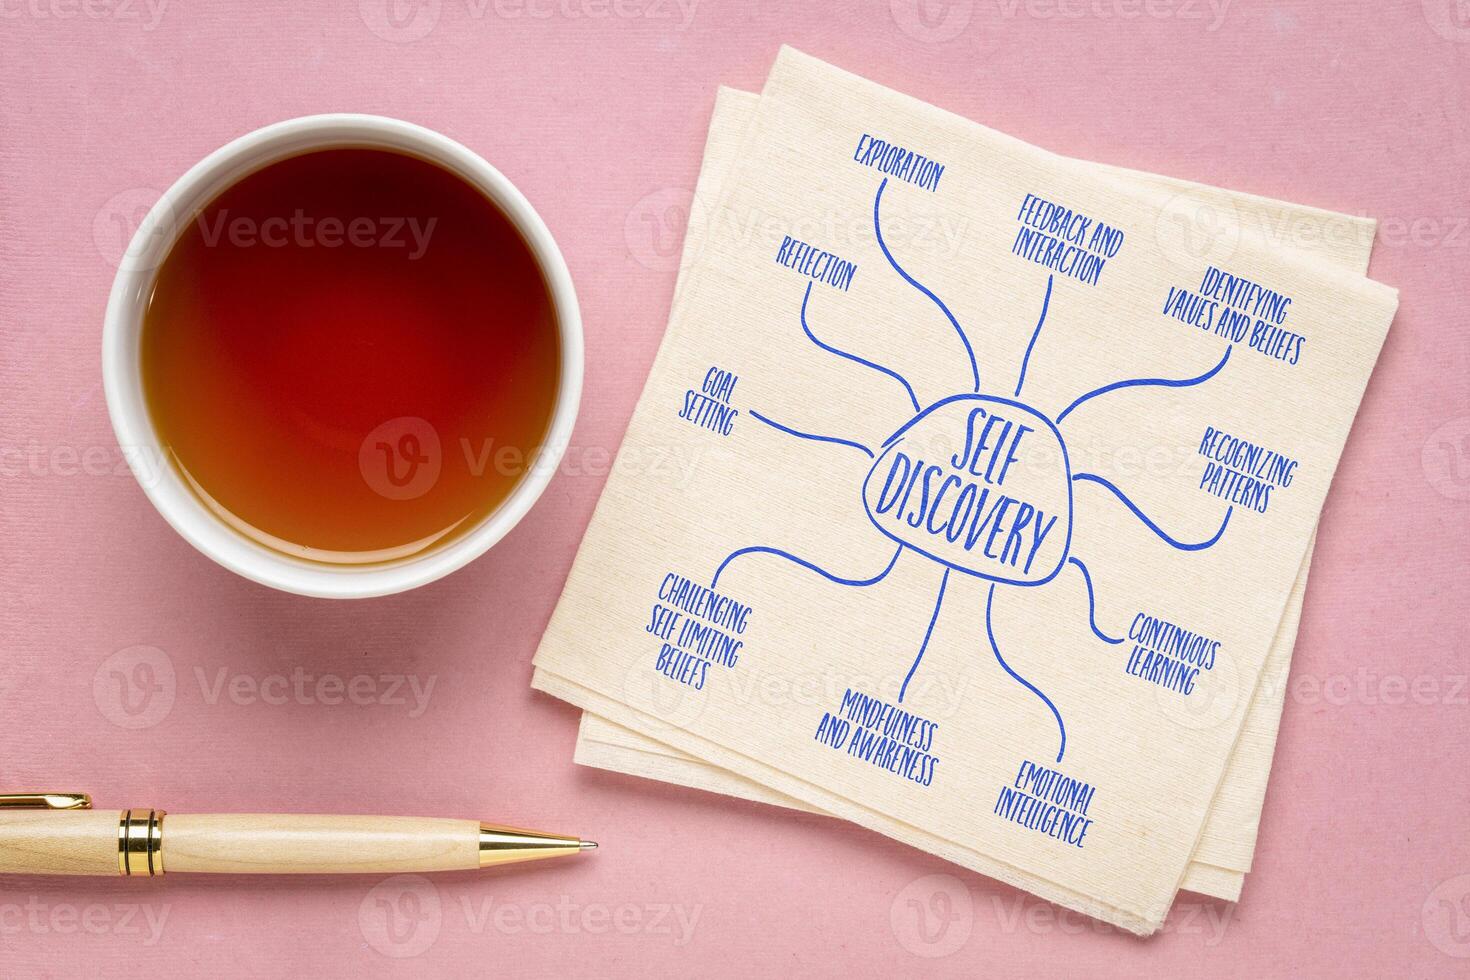 self discovery infographics or mind map sketch on a napkin, personal development concept photo